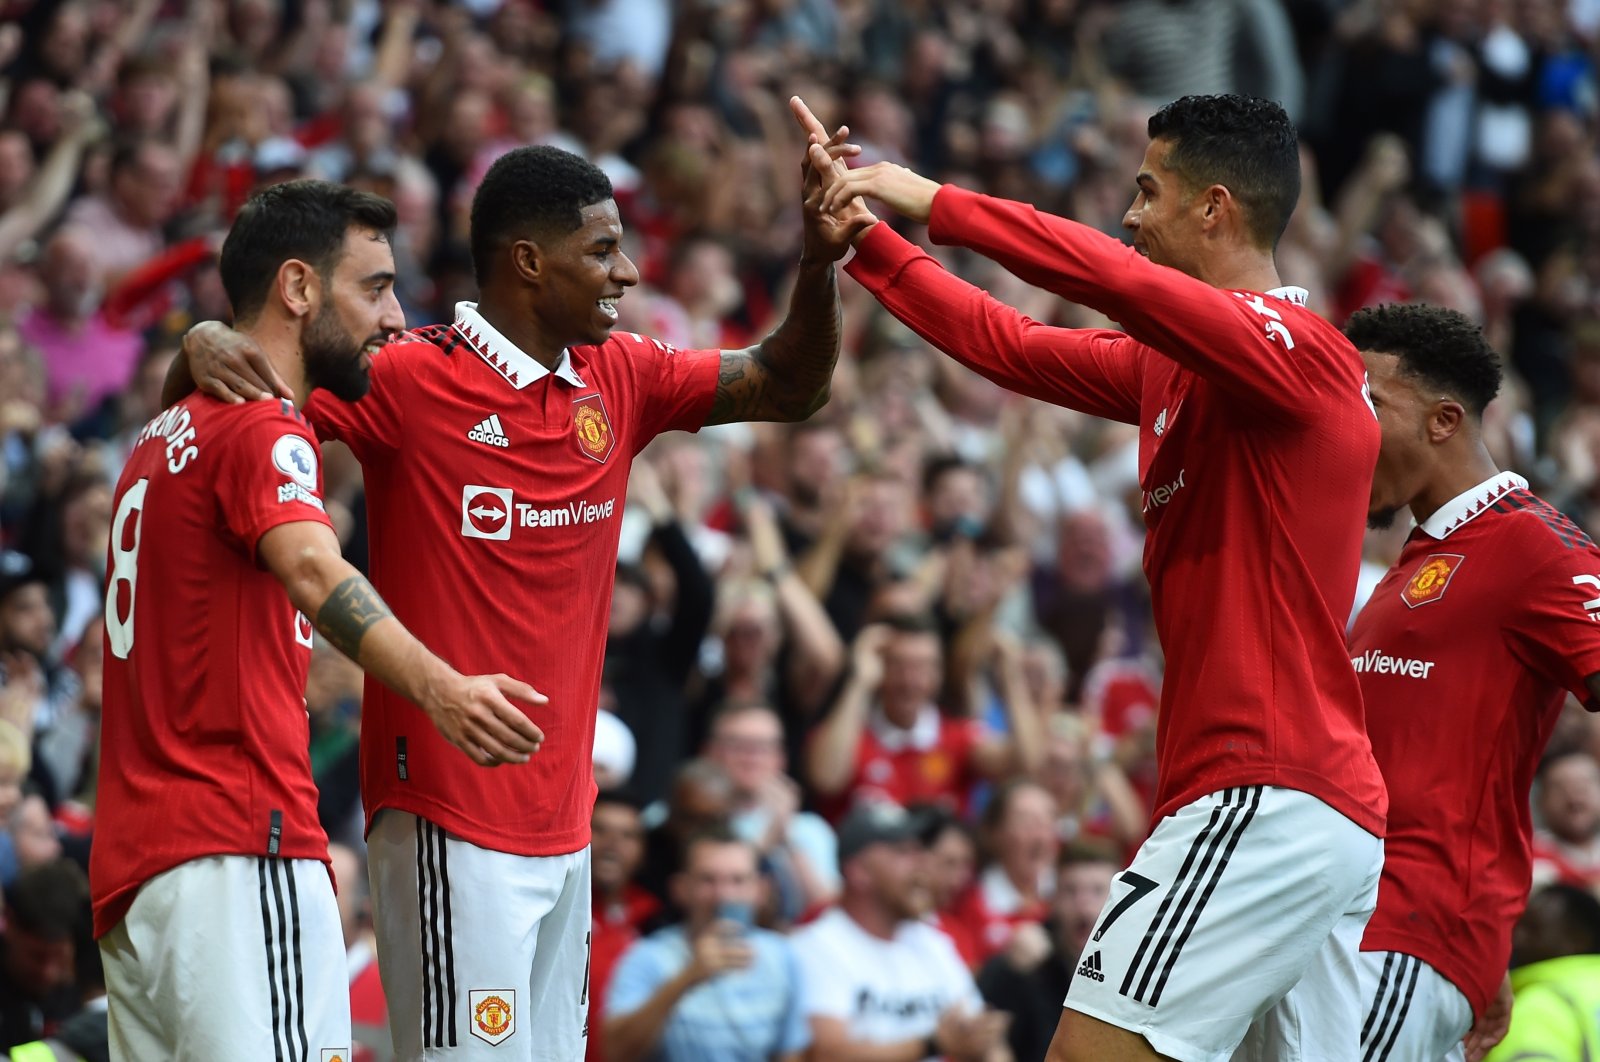 Marcus Rashford (2-L) of Manchester United celebrates after scoring during the English Premier League soccer match between Manchester United and Arsenal FC in Manchester, Britain, Sept. 4, 2022.  (EPA Photo)